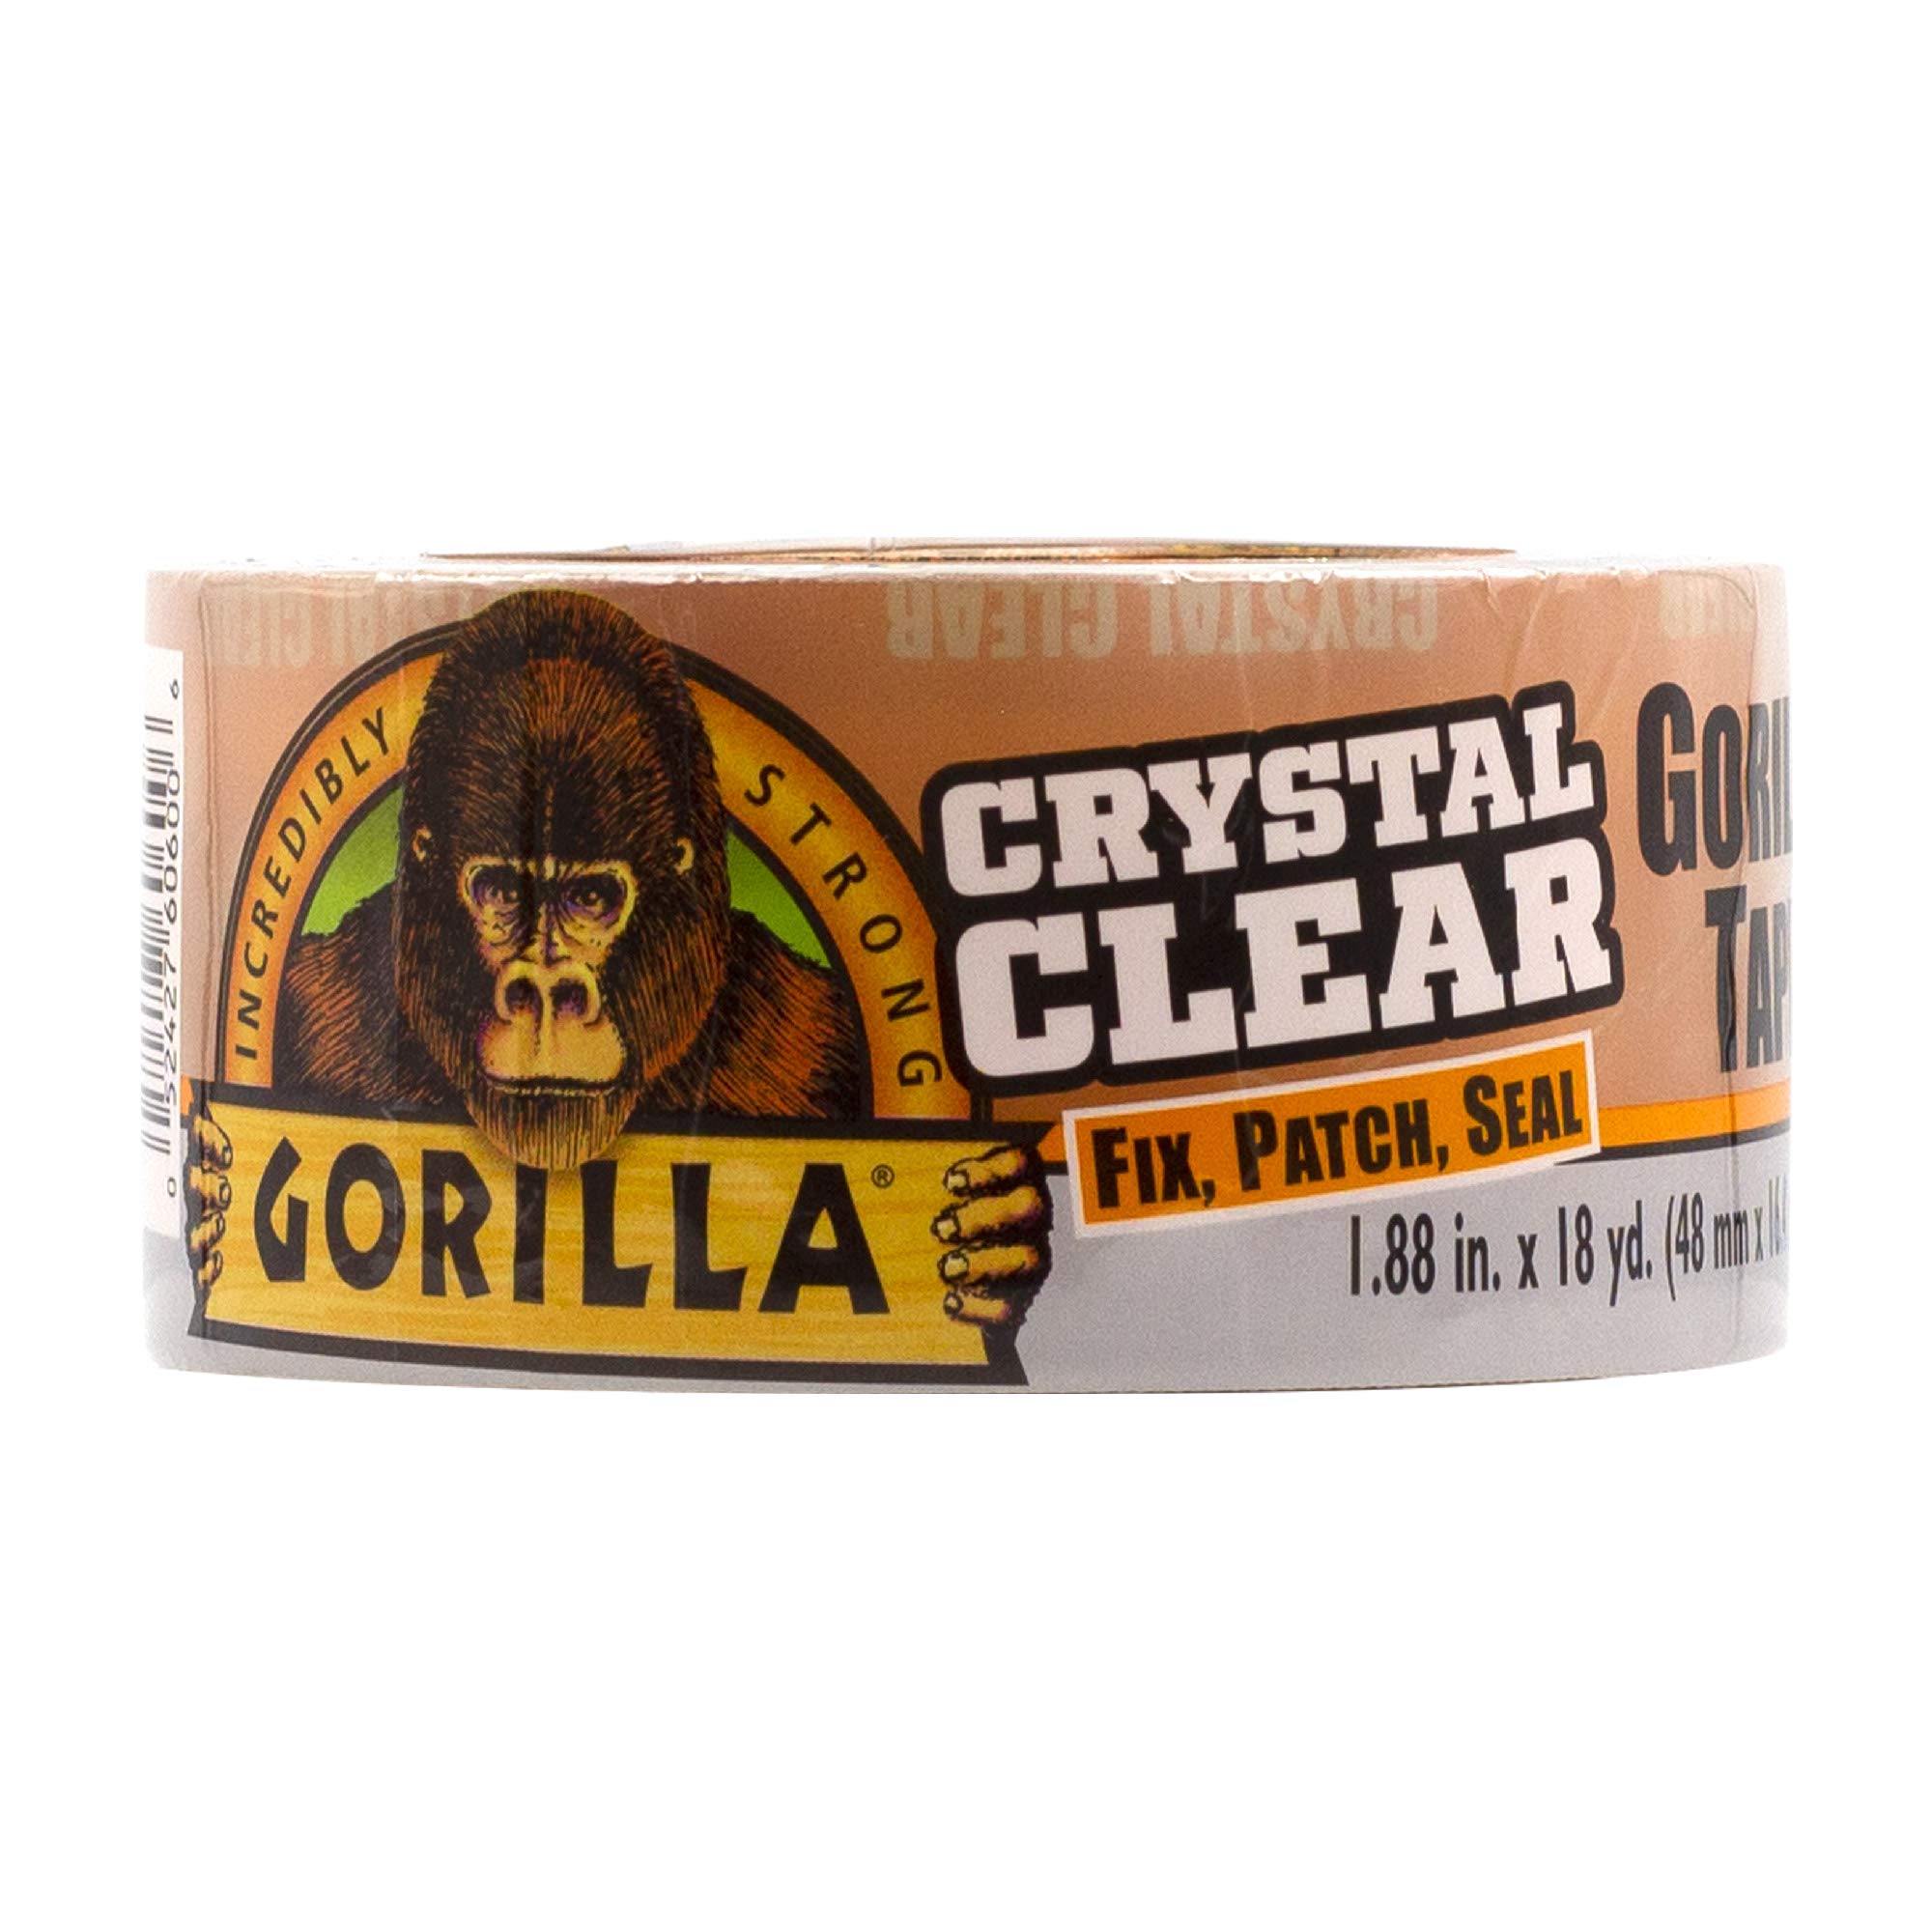 Gorilla Crystal Clear Duct Tape, 1.88” x 18 yd, Clear, (Pack of 1)